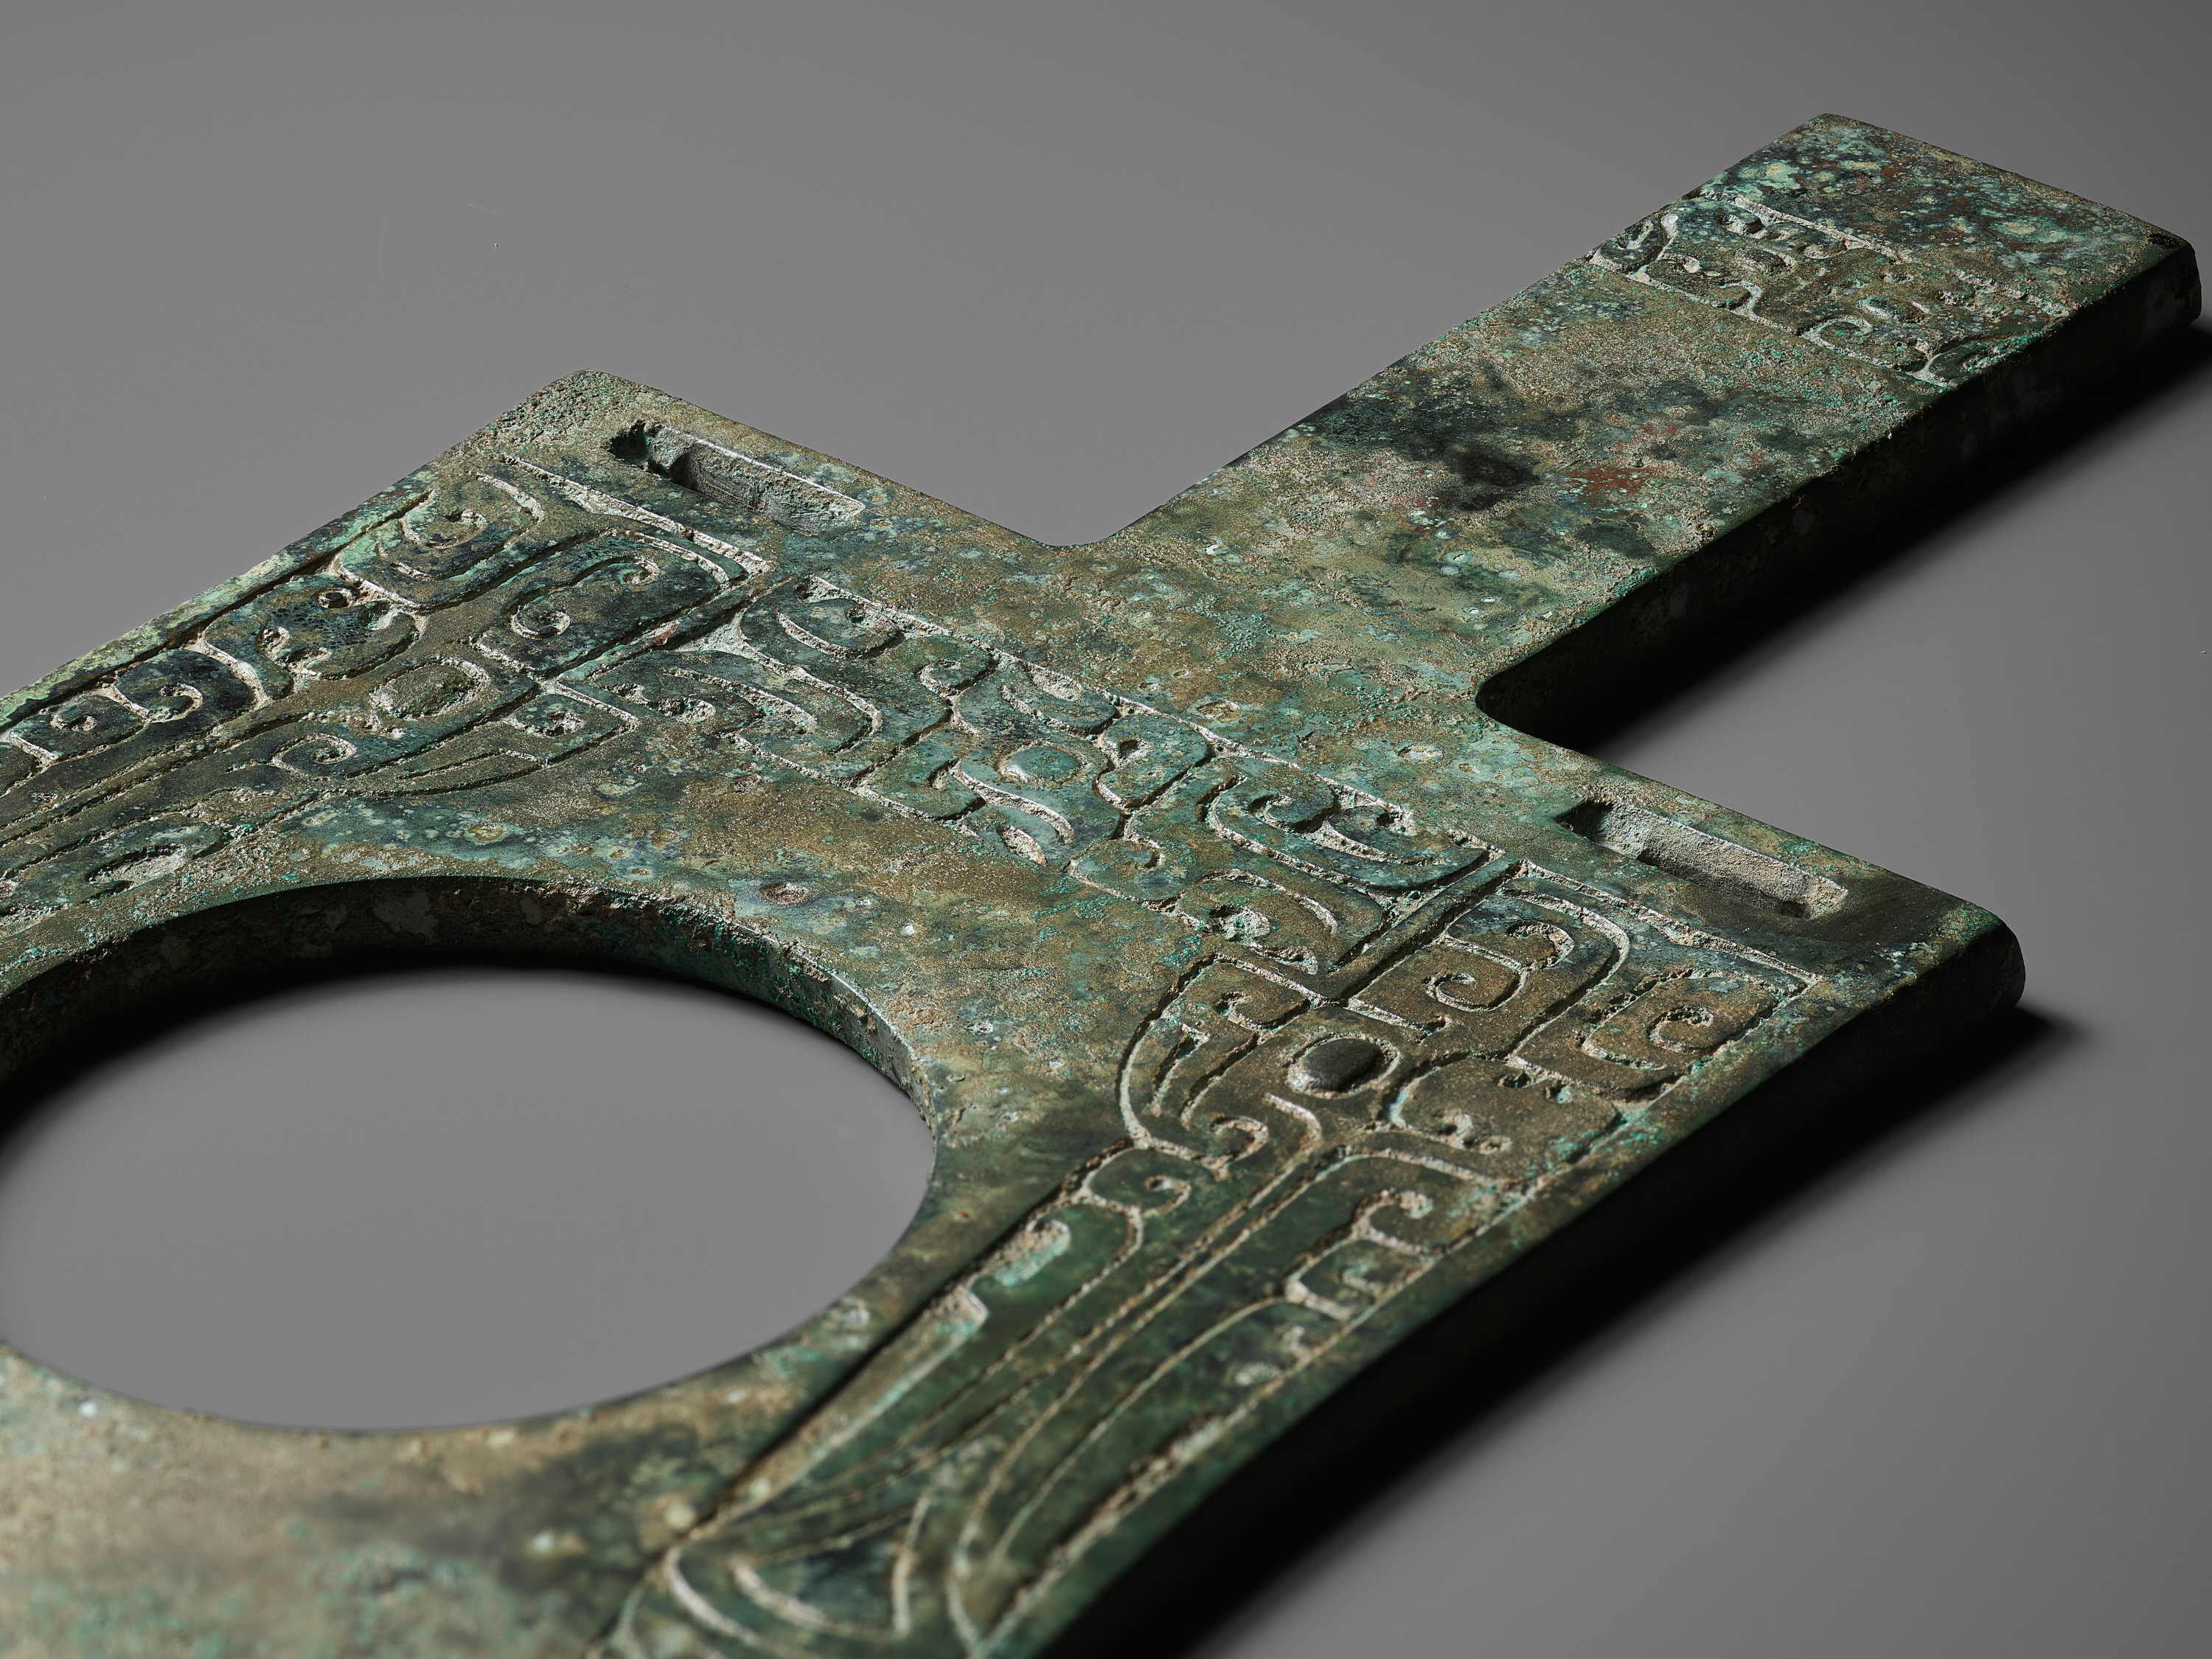 A RARE AND IMPORTANT BRONZE RITUAL AXE-HEAD, YUE, EARLY SHANG DYNASTY, CIRCA 1500-1400 BC - Image 3 of 13